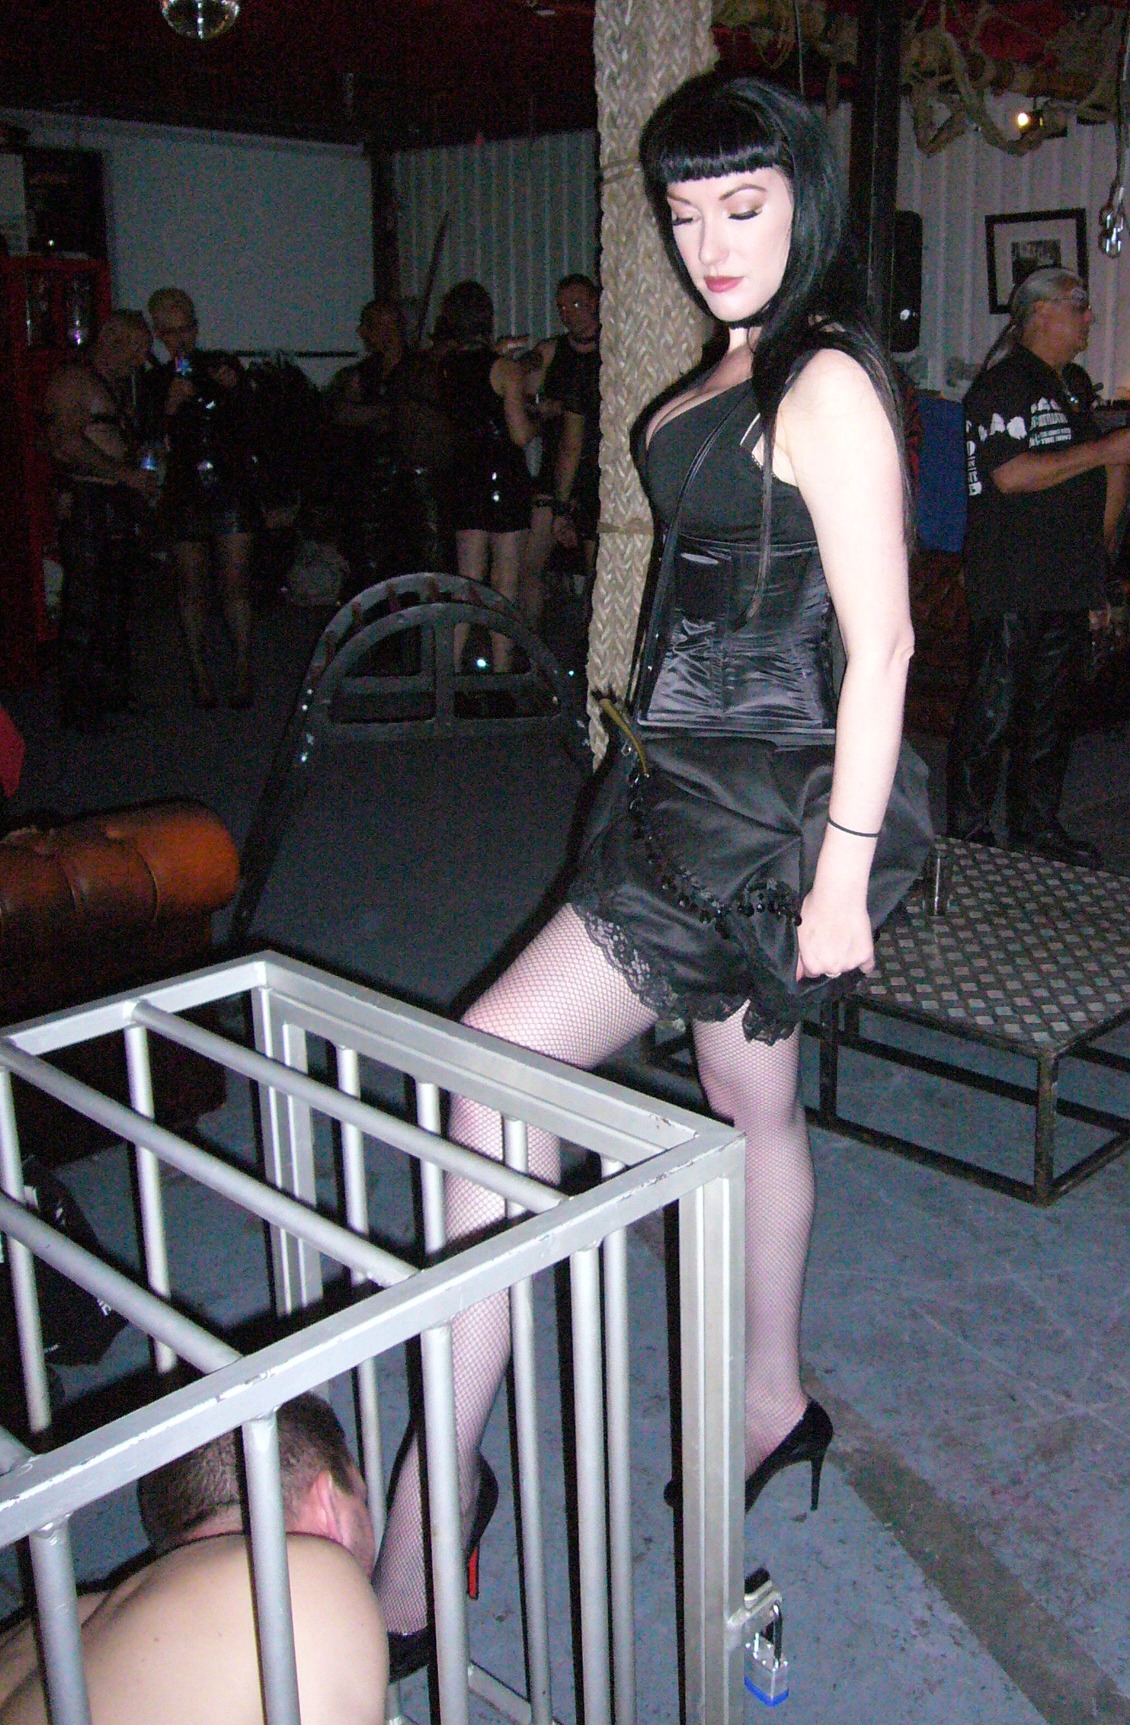 Professional dominatrix Mistress Cleo with a slave in a cage licking her foot